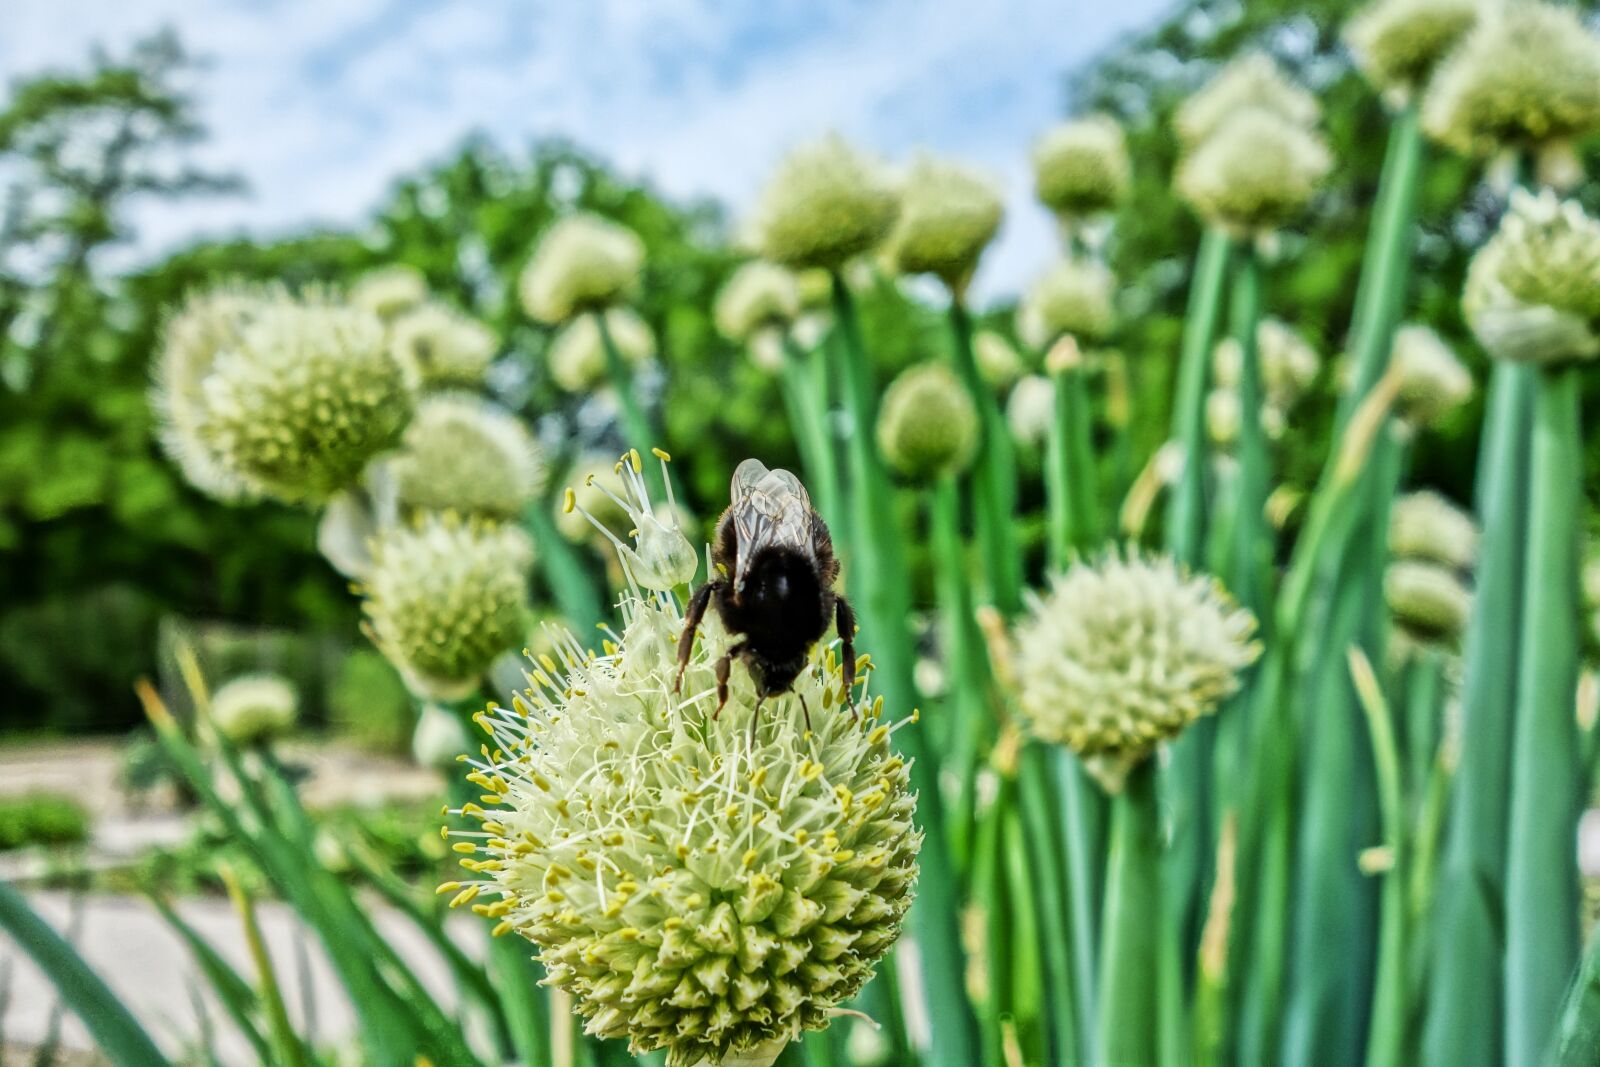 Sony Cyber-shot DSC-RX100 sample photo. Flower, bumblebee, insect photography